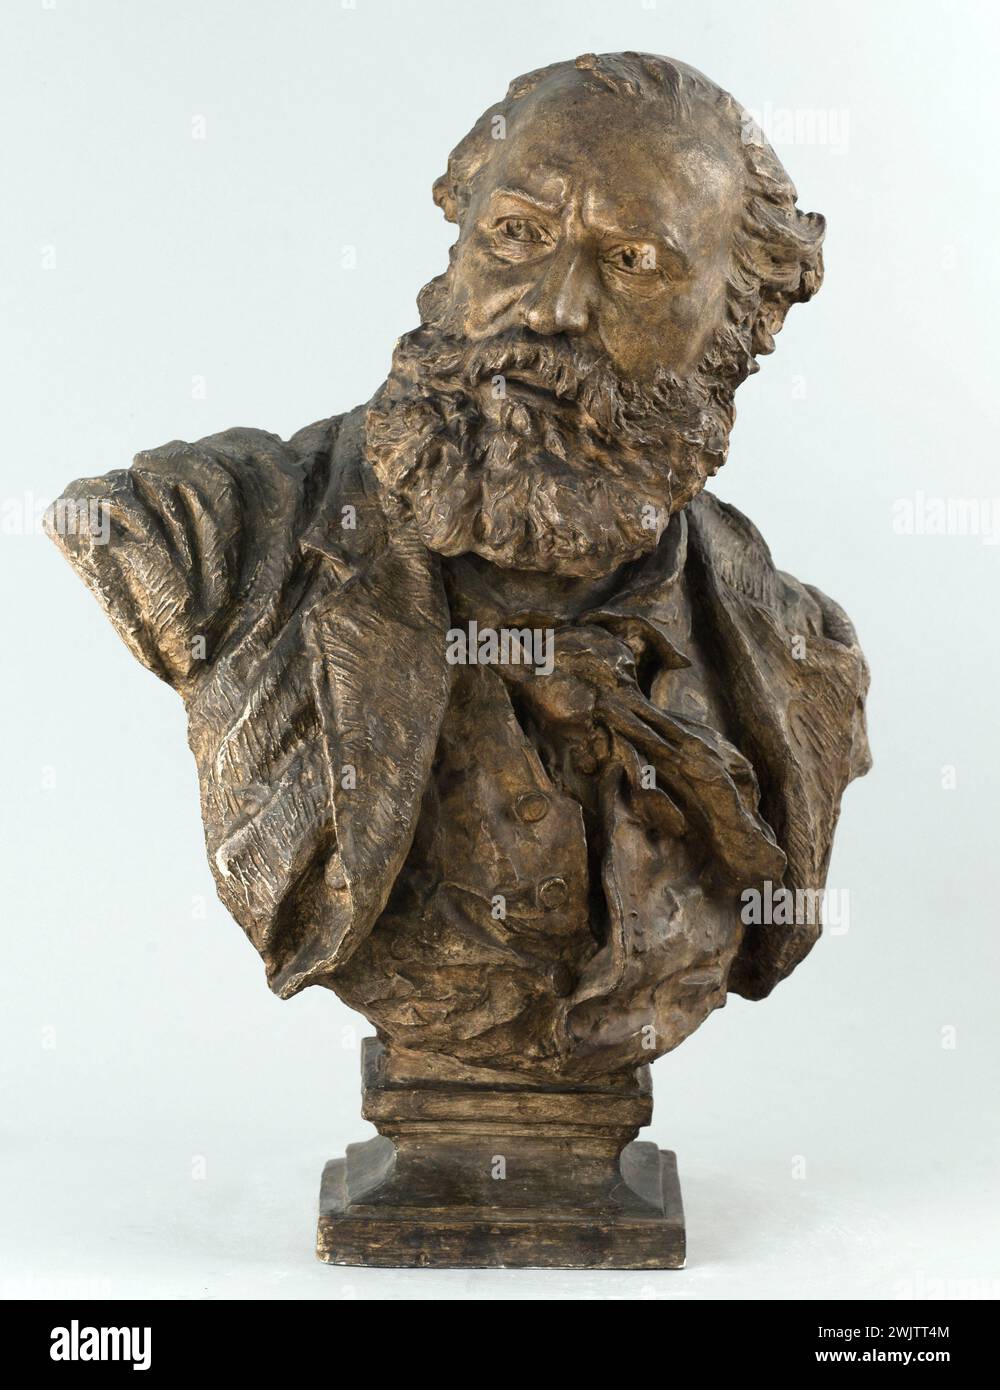 Jean-Baptiste Carpeaux (1827-1875). Bust of Charles Gounod n ° 1. Patinated plaster, 1873. Museum of Fine Arts of the City of Paris, Petit Palais. 78930-31 Bust, French composer, man, romantic music, Rome 1839 prize, portrait, front view, 19th 19th 19th 19th 19th 19th century, mustache Stock Photo